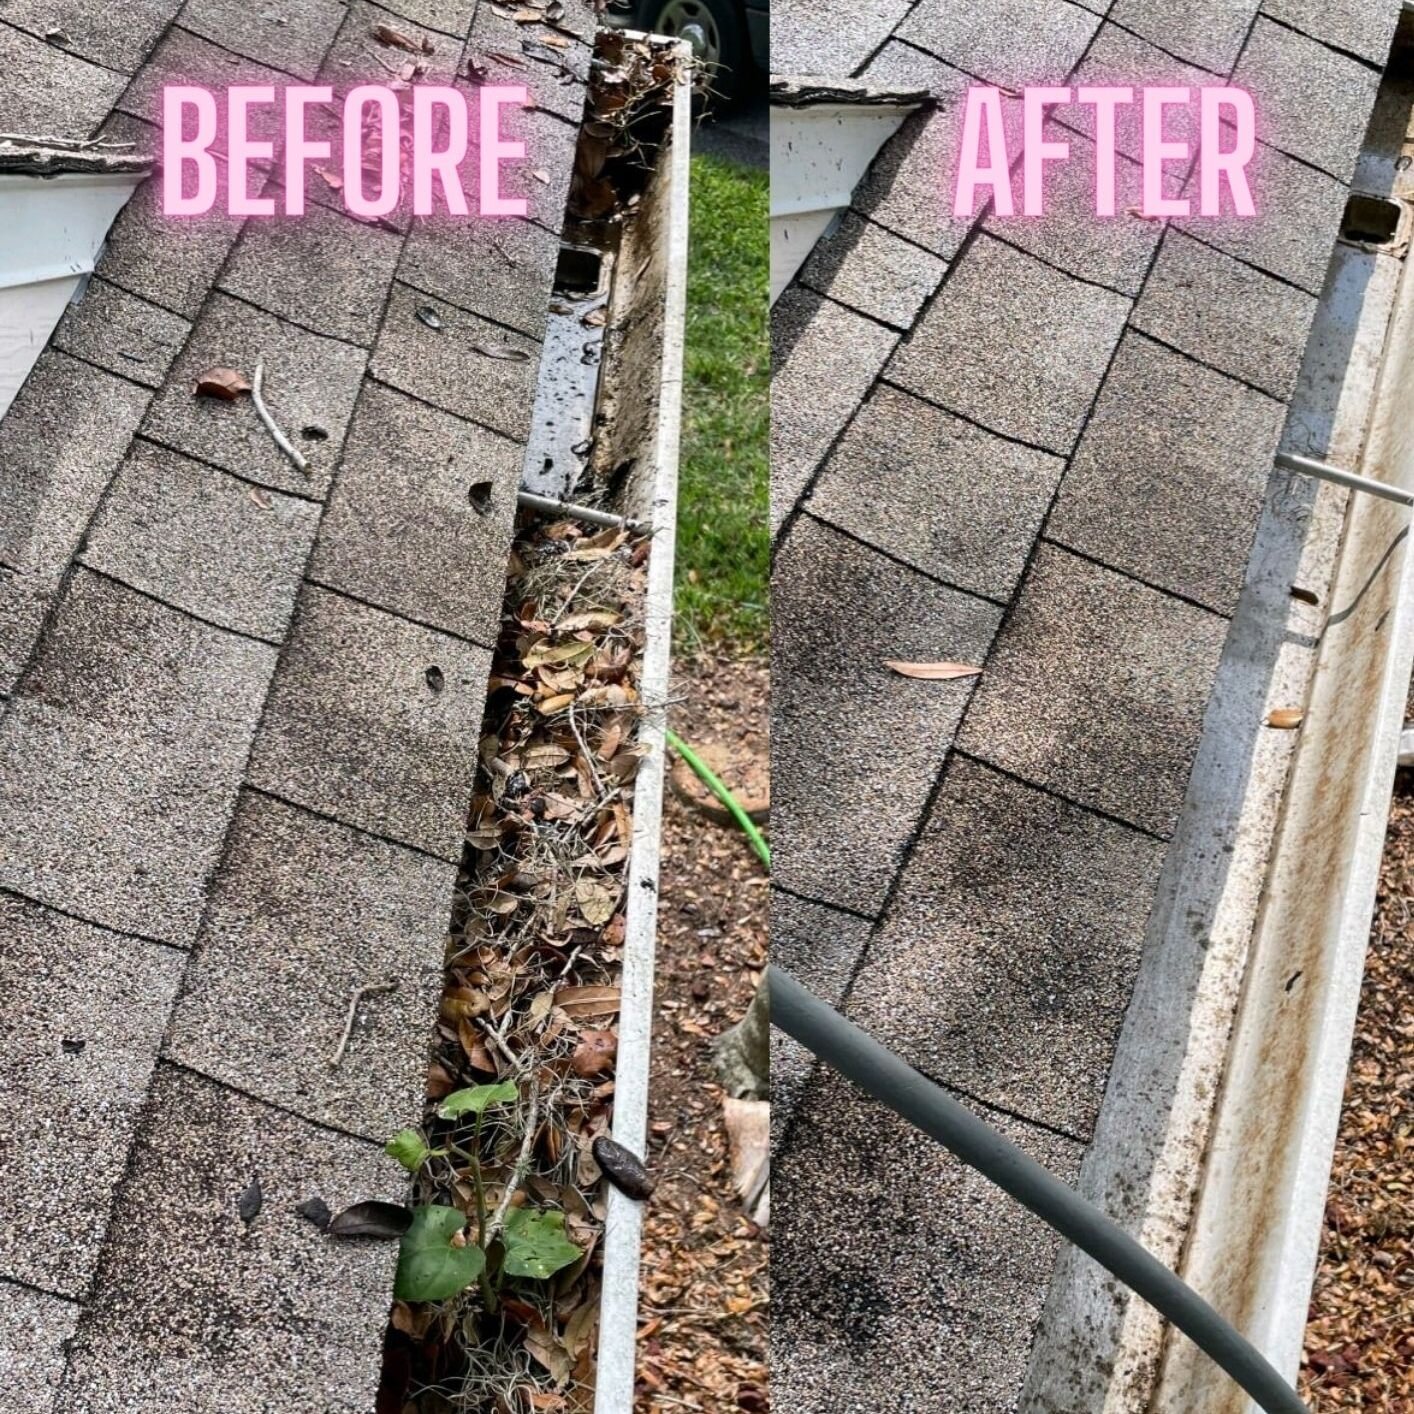 🌟 Say Goodbye to Clogged Gutters with Fidelity Pressure Washing! 🌟

Are your gutters clogged and causing problems for your home? Fidelity Pressure Washing is here to save the day with our professional gutter cleaning services! 🍃💦

✅ Protect Your 